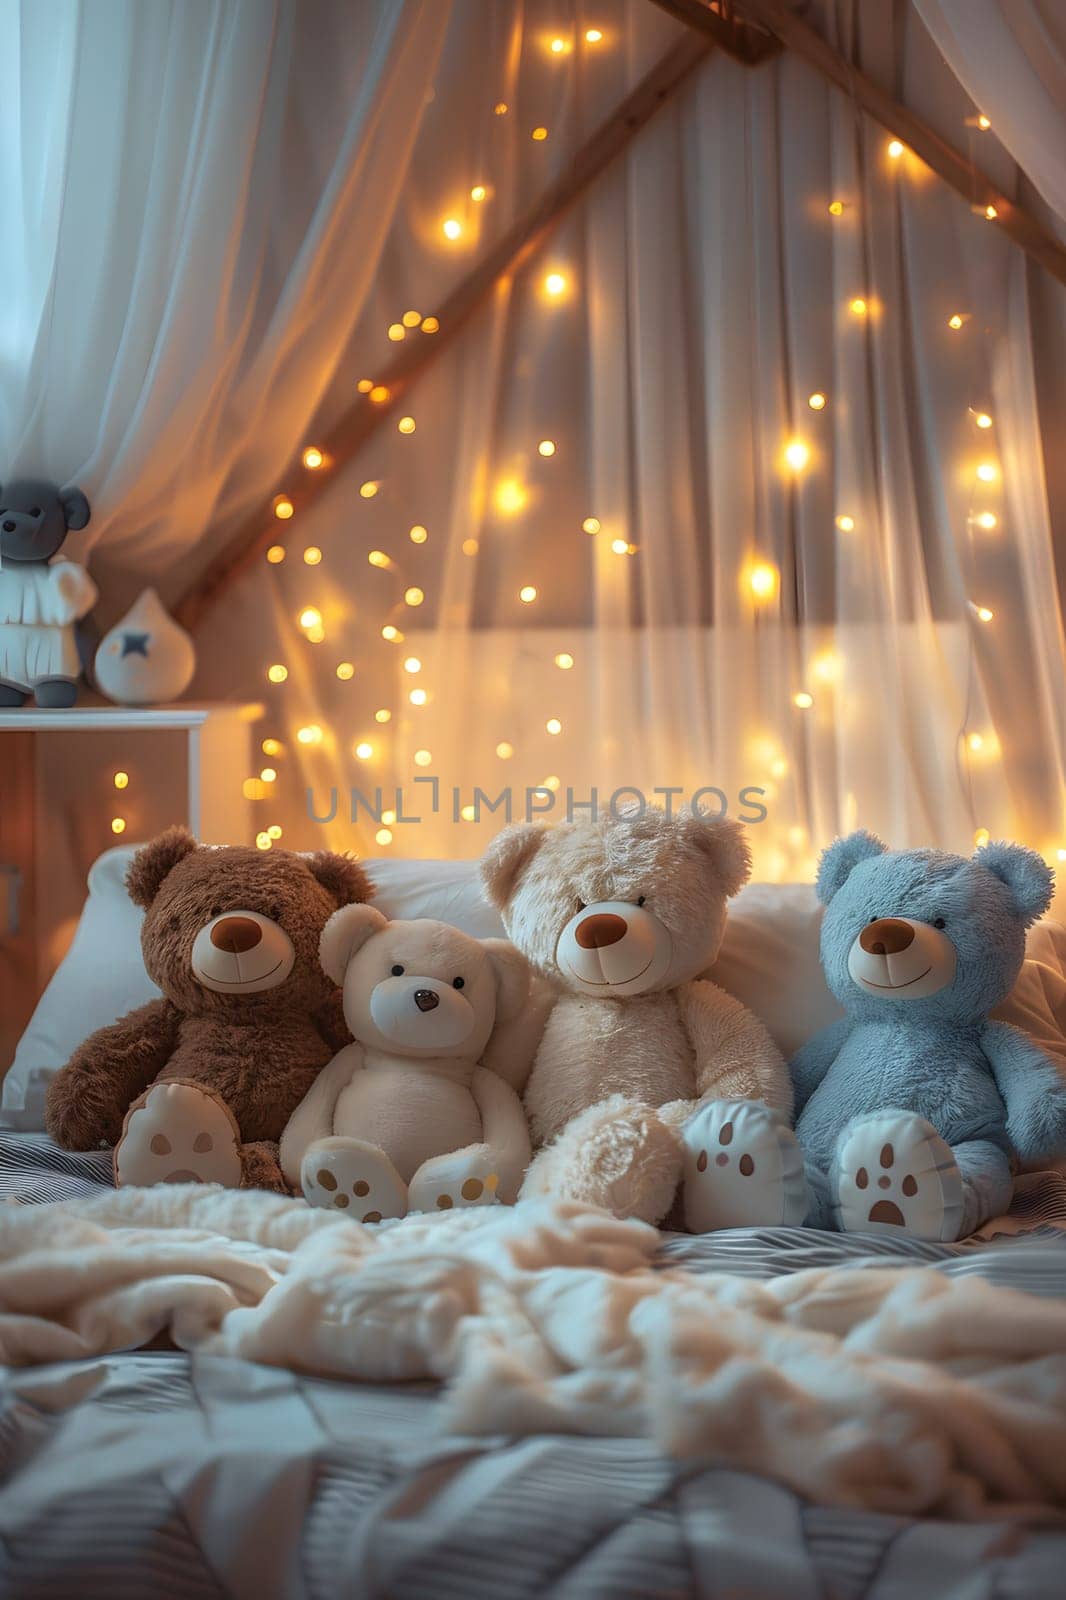 A group of plush teddy bears sitting on a bed in an interior design event by Nadtochiy